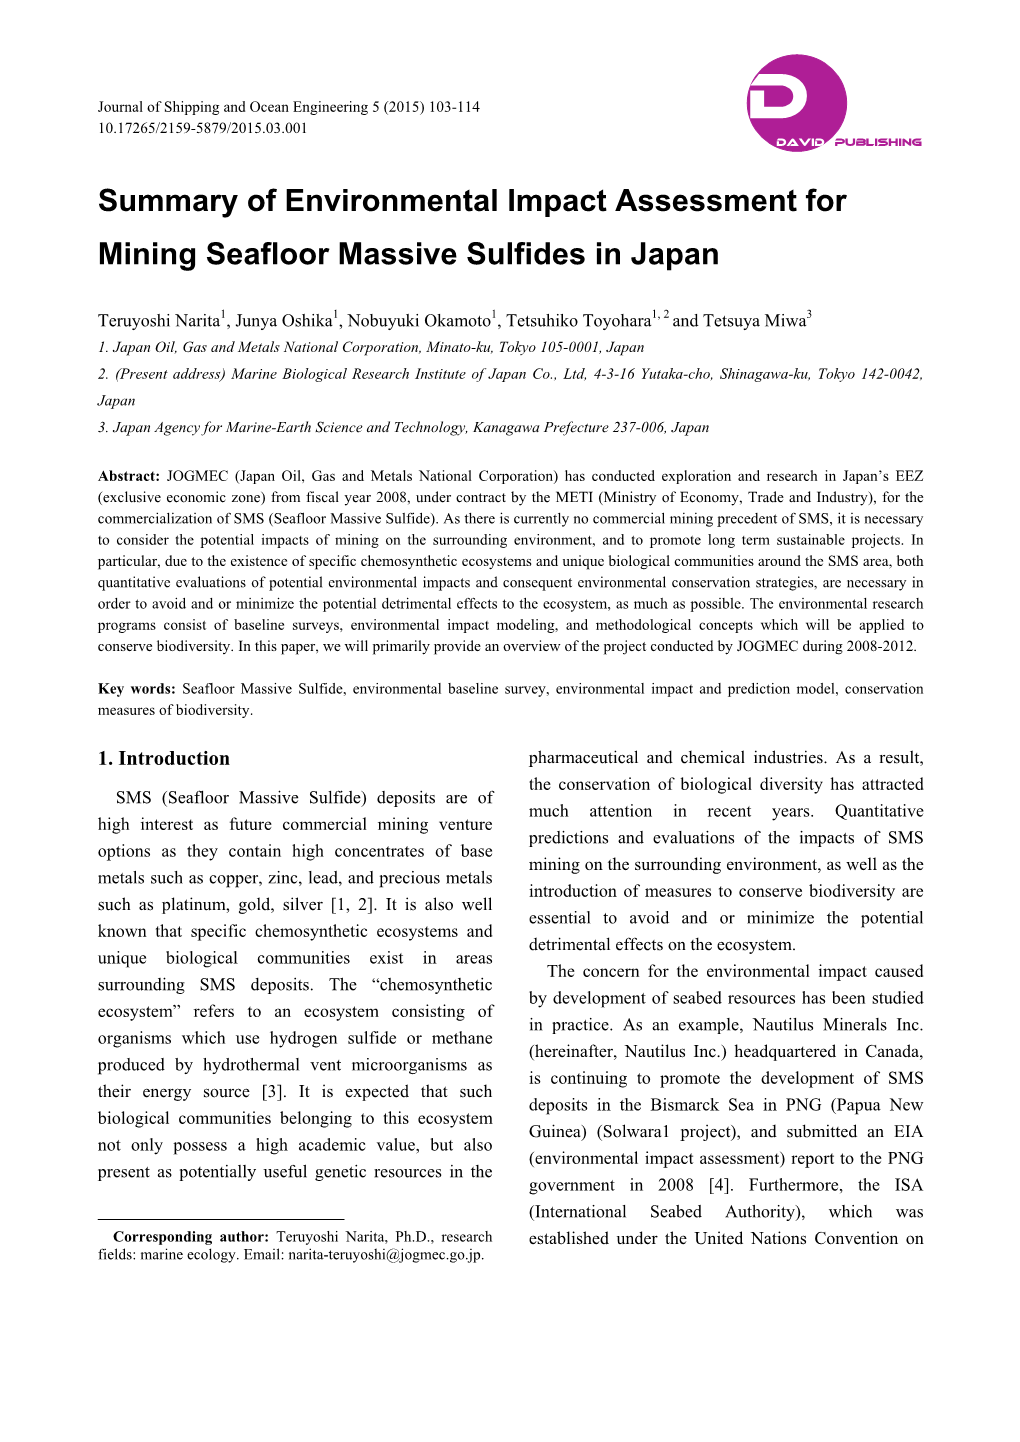 Summary of Environmental Impact Assessment for Mining Seafloor Massive Sulfides in Japan